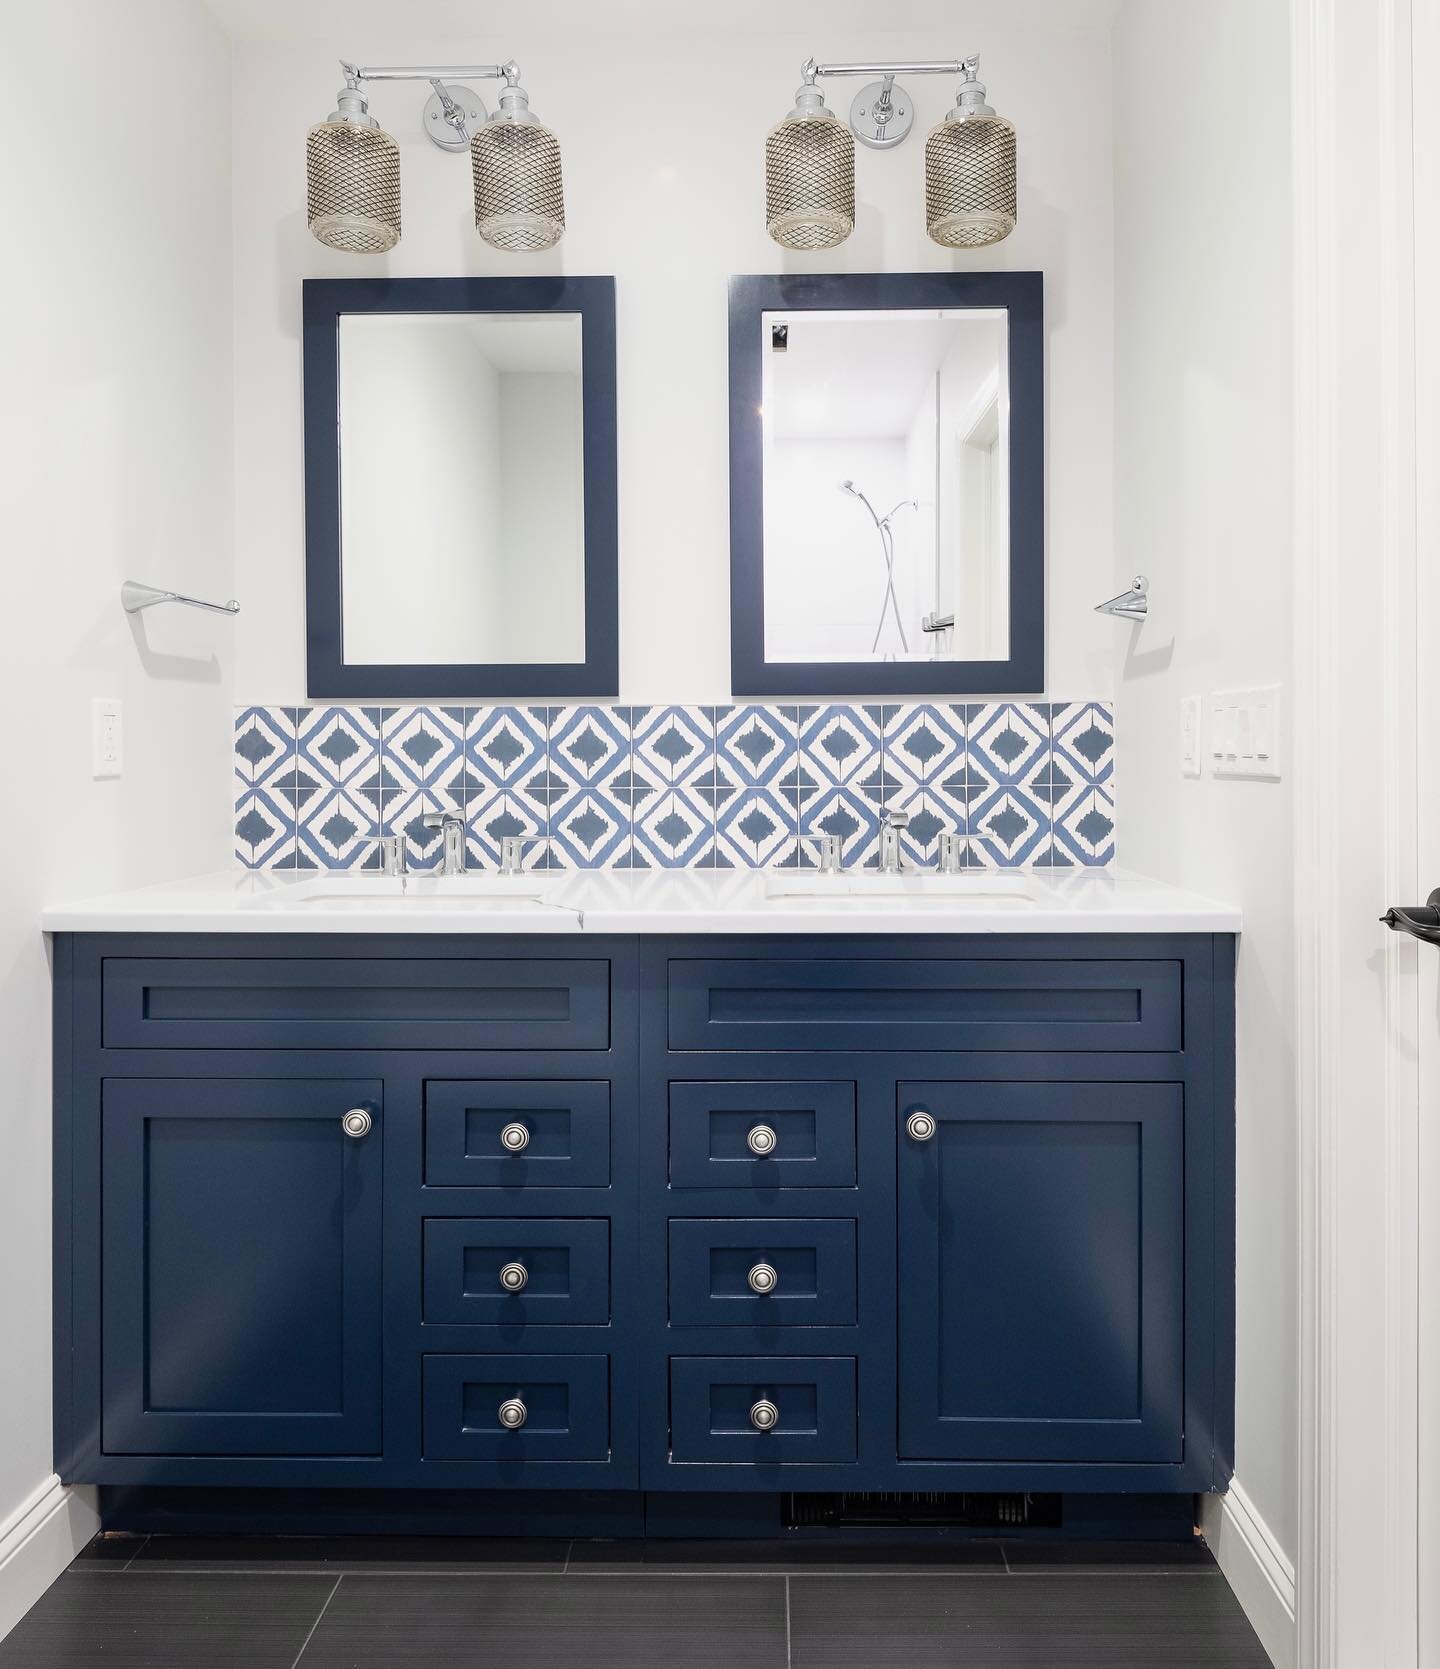 This smaller scale double vanity brings lots of function to this master bath. The patterned backsplash, elegant lighting and matching mirrors complete the ensemble. #smallspacedesign #bathroomdesign #bathroomremodel #bathroomdecor #blue #bluebathroom